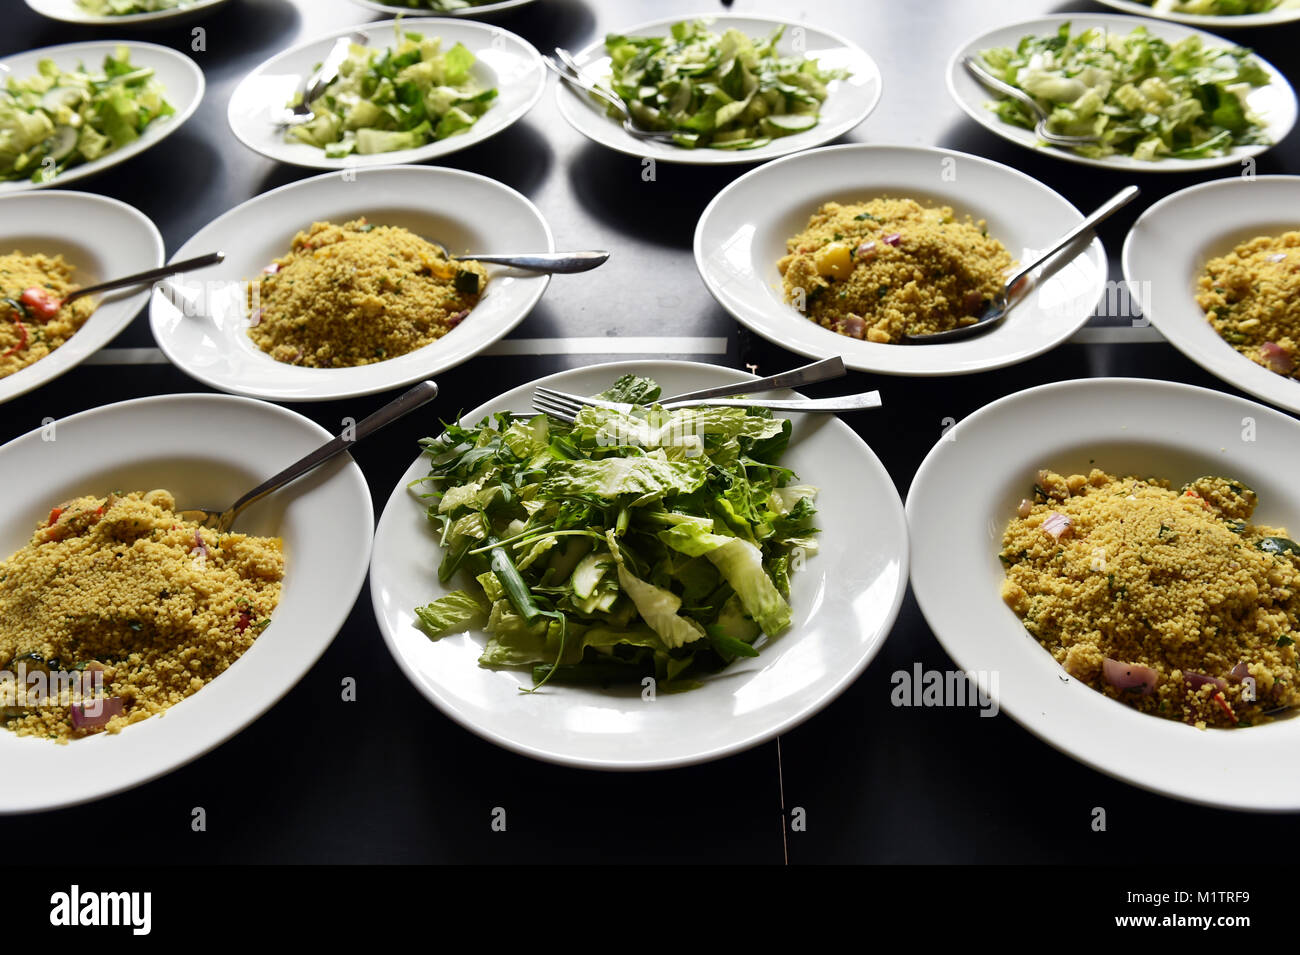 Plates of couscous and green salad ready to be served. Stock Photo